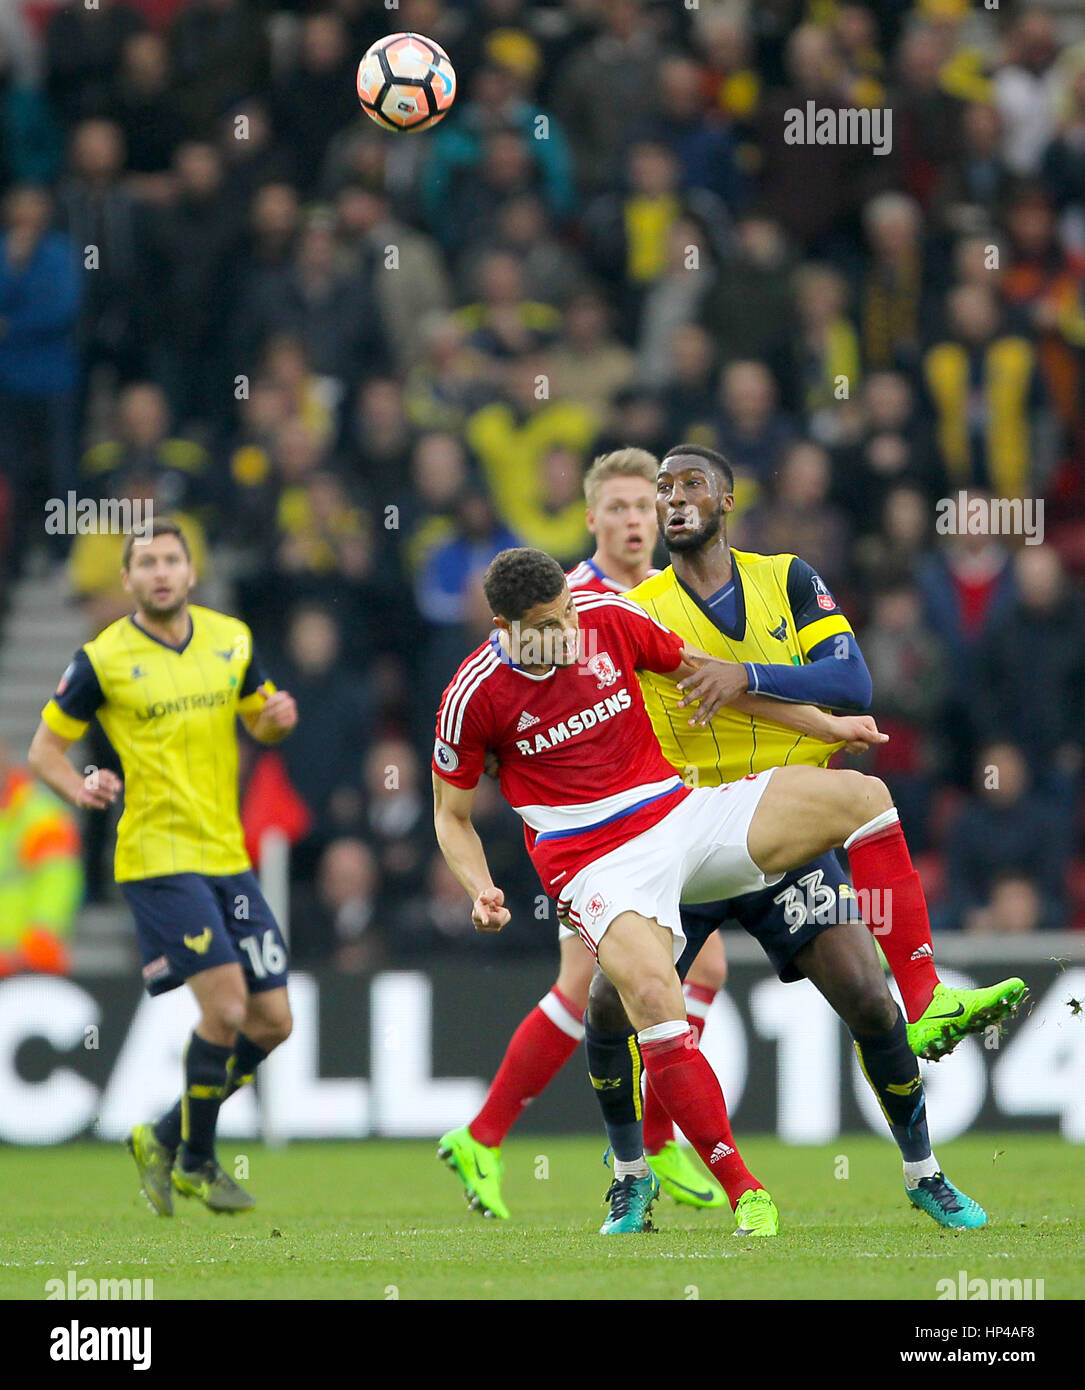 Middlesbrough's Rudy Gestede (left) and Oxford United's Cheyenne Dunkley battle for the ball during the Emirates FA Cup, Fifth Round match at the Riverside Stadium, Middlesbrough. PRESS ASSOCIATION Photo. Picture date: Saturday February 18, 2017. See PA story SOCCER Middlesbrough. Photo credit should read: Richard Sellers/PA Wire. RESTRICTIONS: No use with unauthorised audio, video, data, fixture lists, club/league logos or 'live' services. Online in-match use limited to 75 images, no video emulation. No use in betting, games or single club/league/player publications. Stock Photo